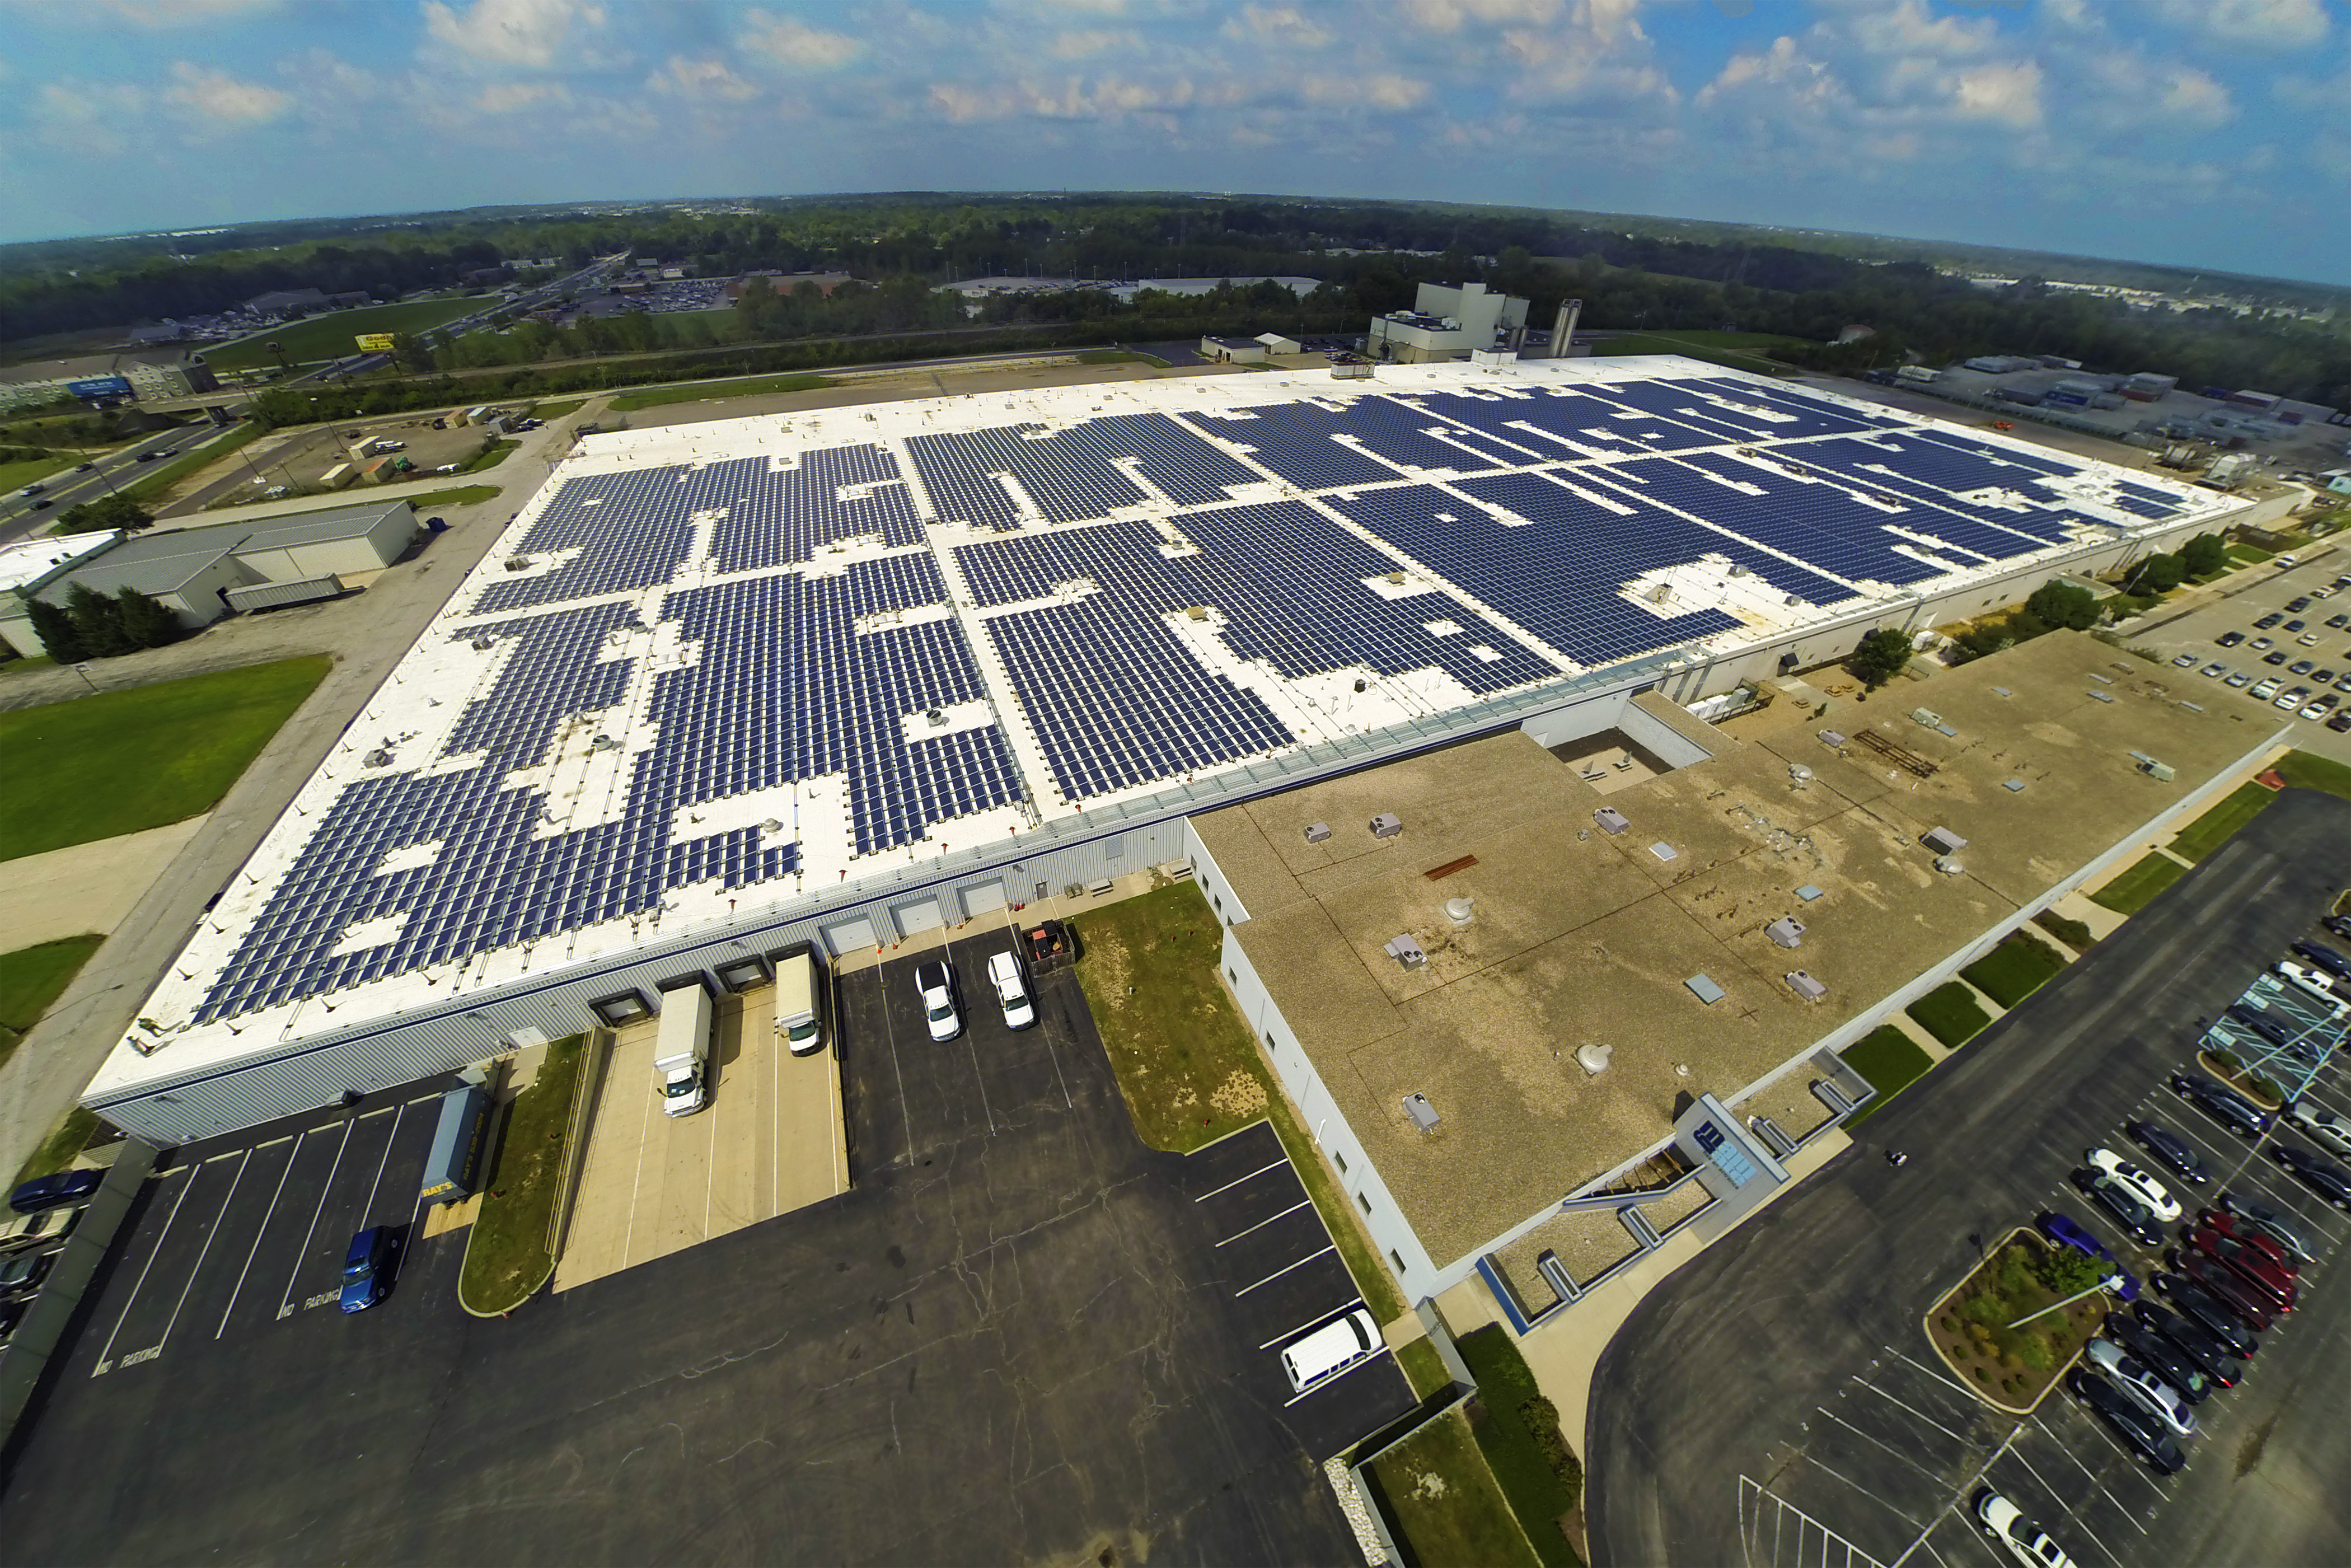 Aerial view of Equity rooftop with solar panels